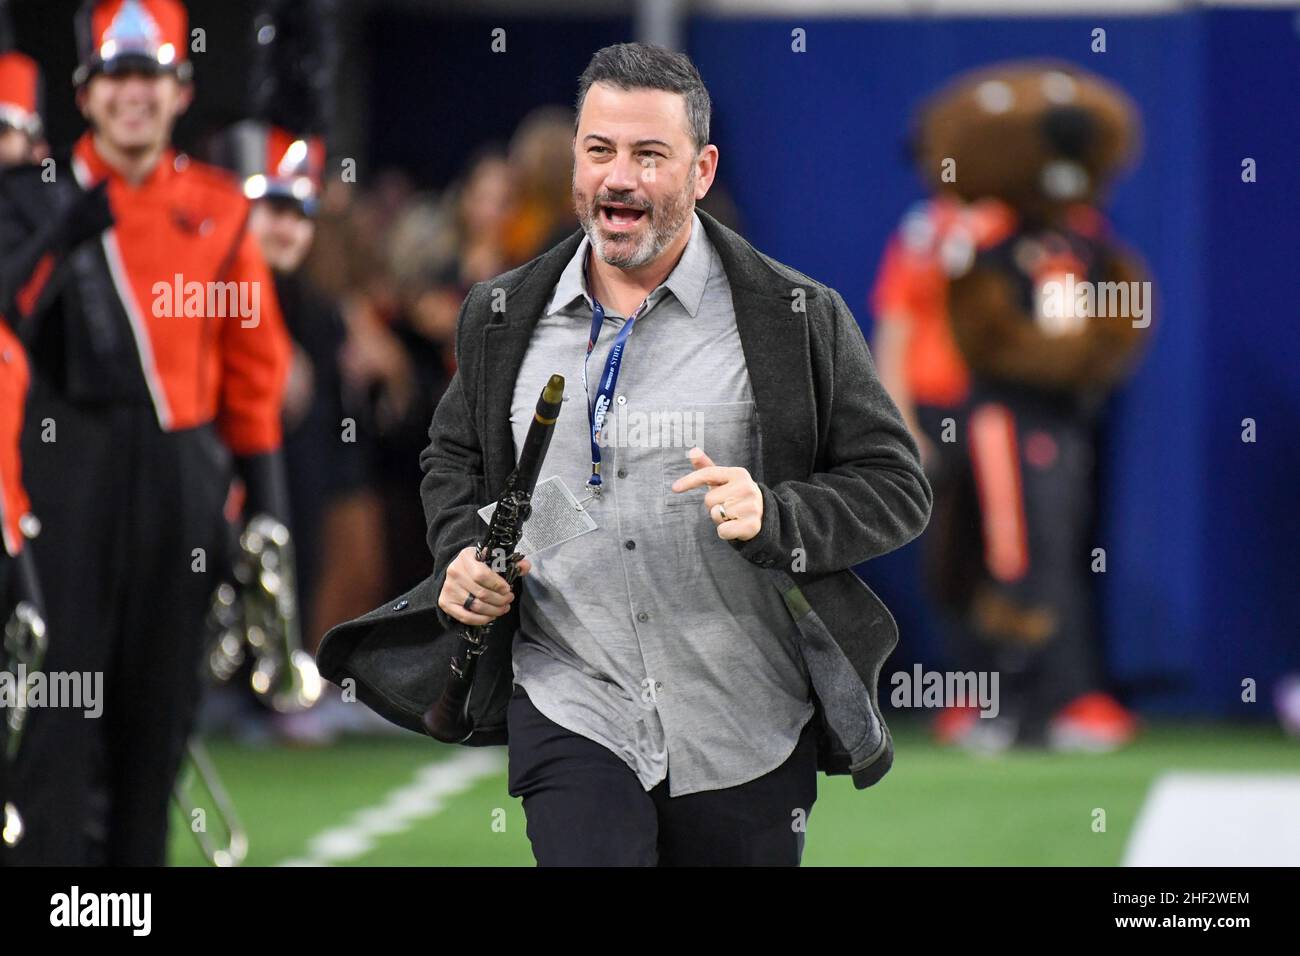 American television host Jimmy Kimmel during the LA Bowl game, Saturday, Dec. 18, 2021, in Los Angeles. The Utah State Aggies defeated Oregon State Be Stock Photo